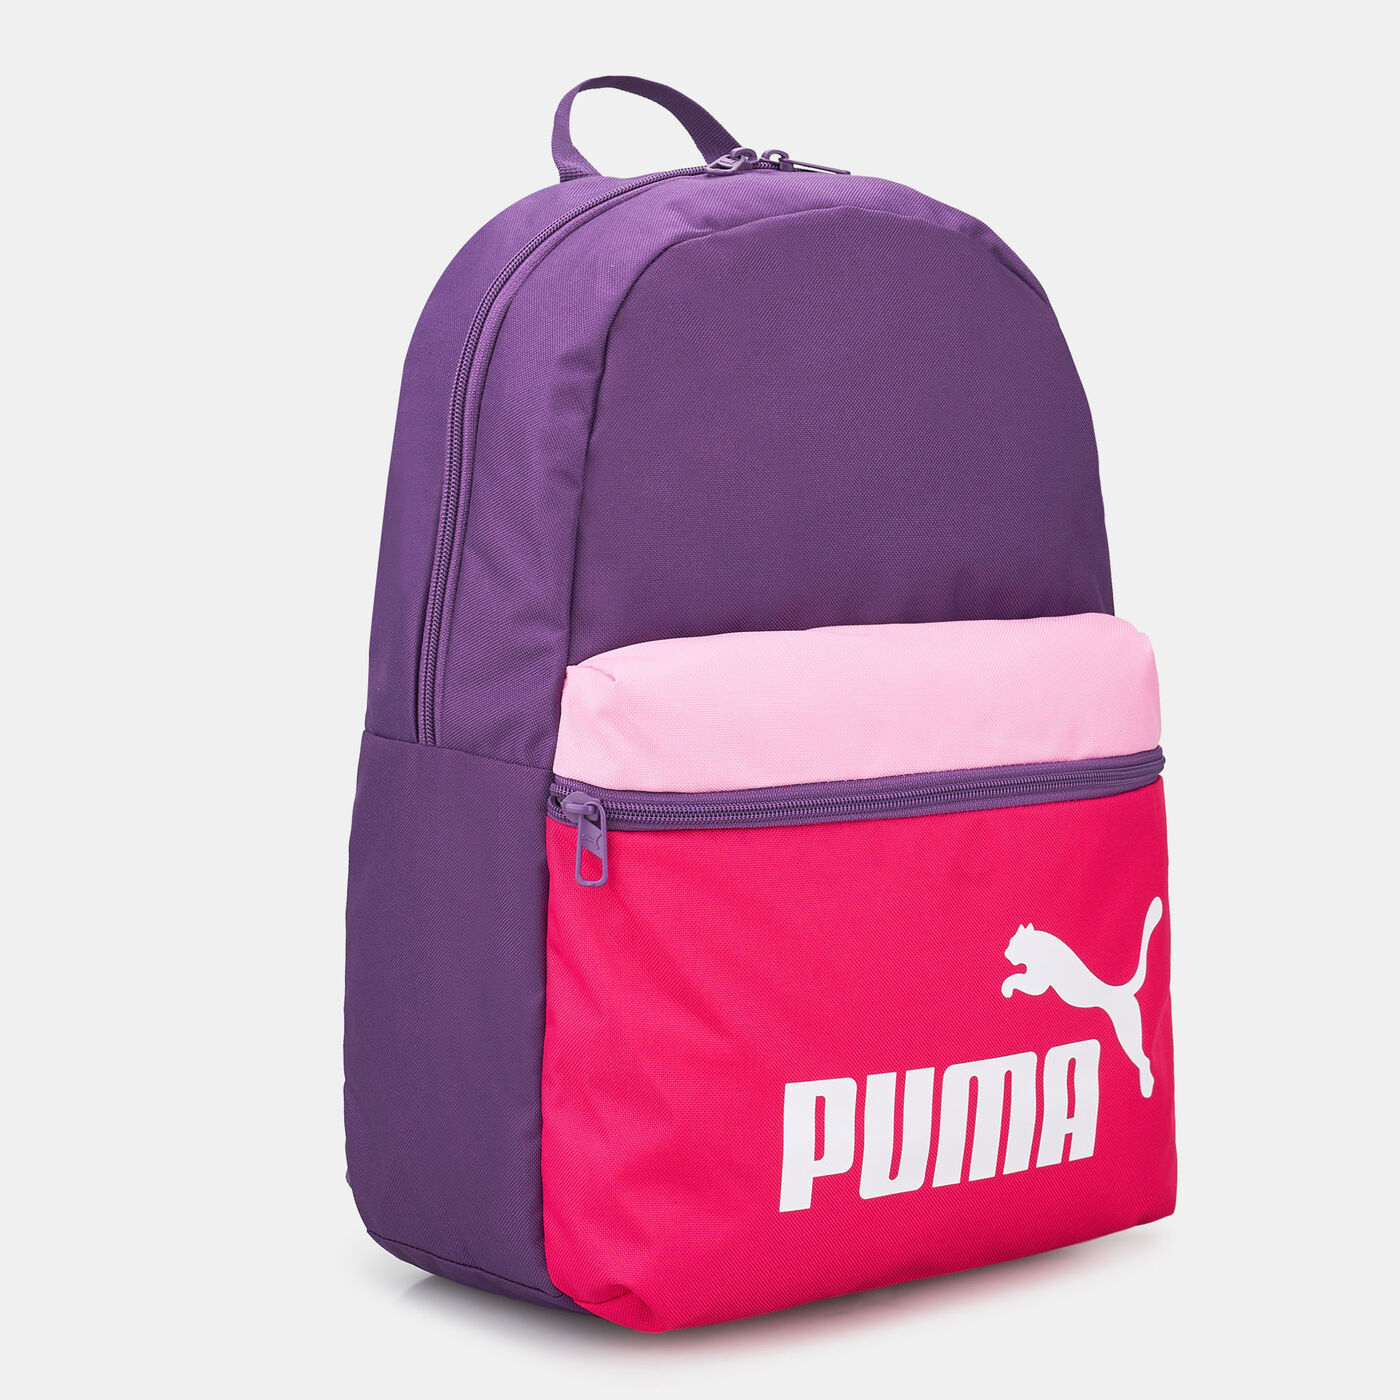 Phase Colorblock Backpack